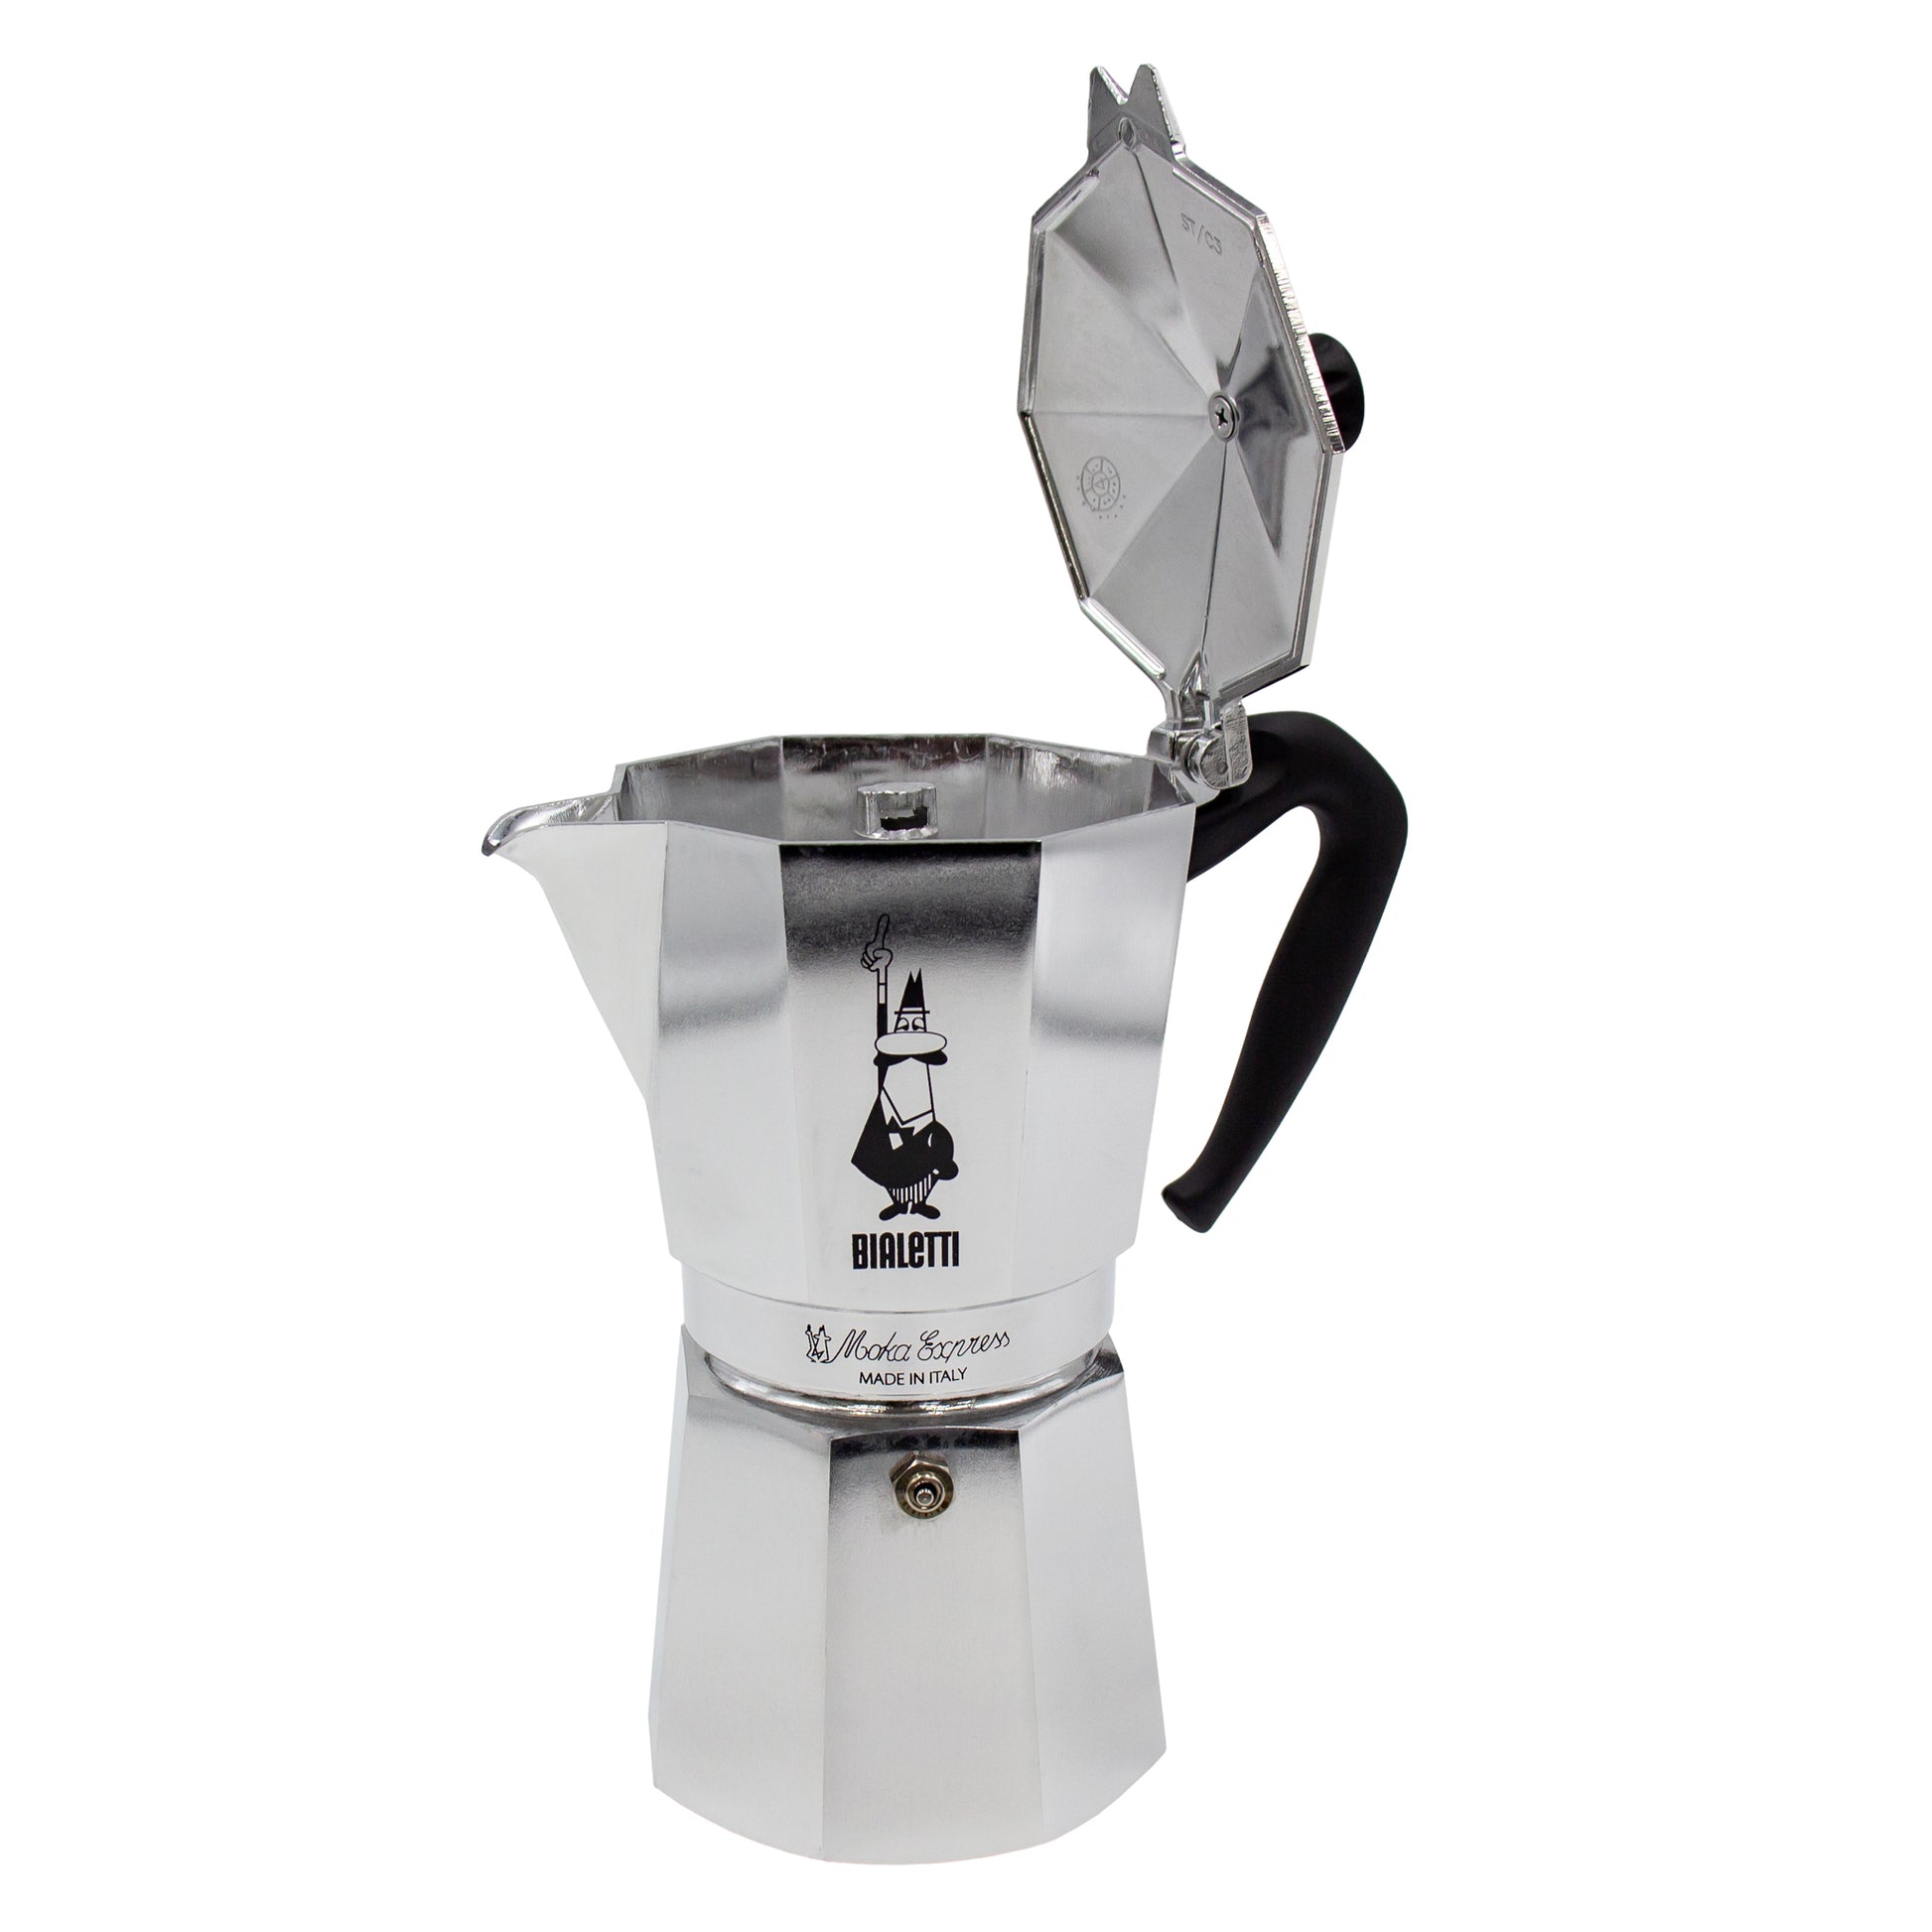 Italian made bialetti moka express 6 cup espresso coffee maker with lid open